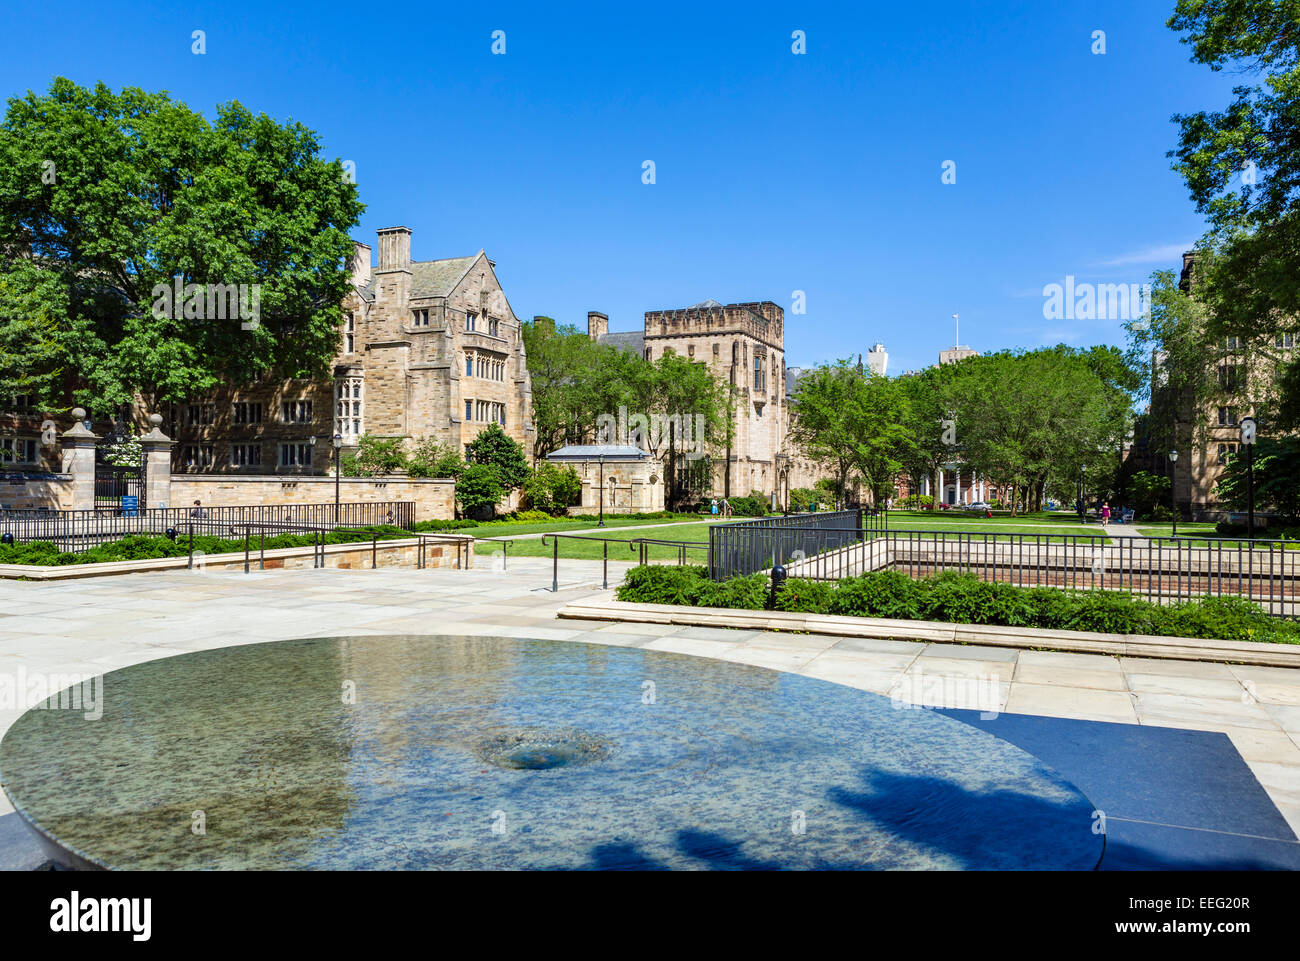 The Cross Campus at Yale University, New Haven, Connecticut, USA Stock Photo